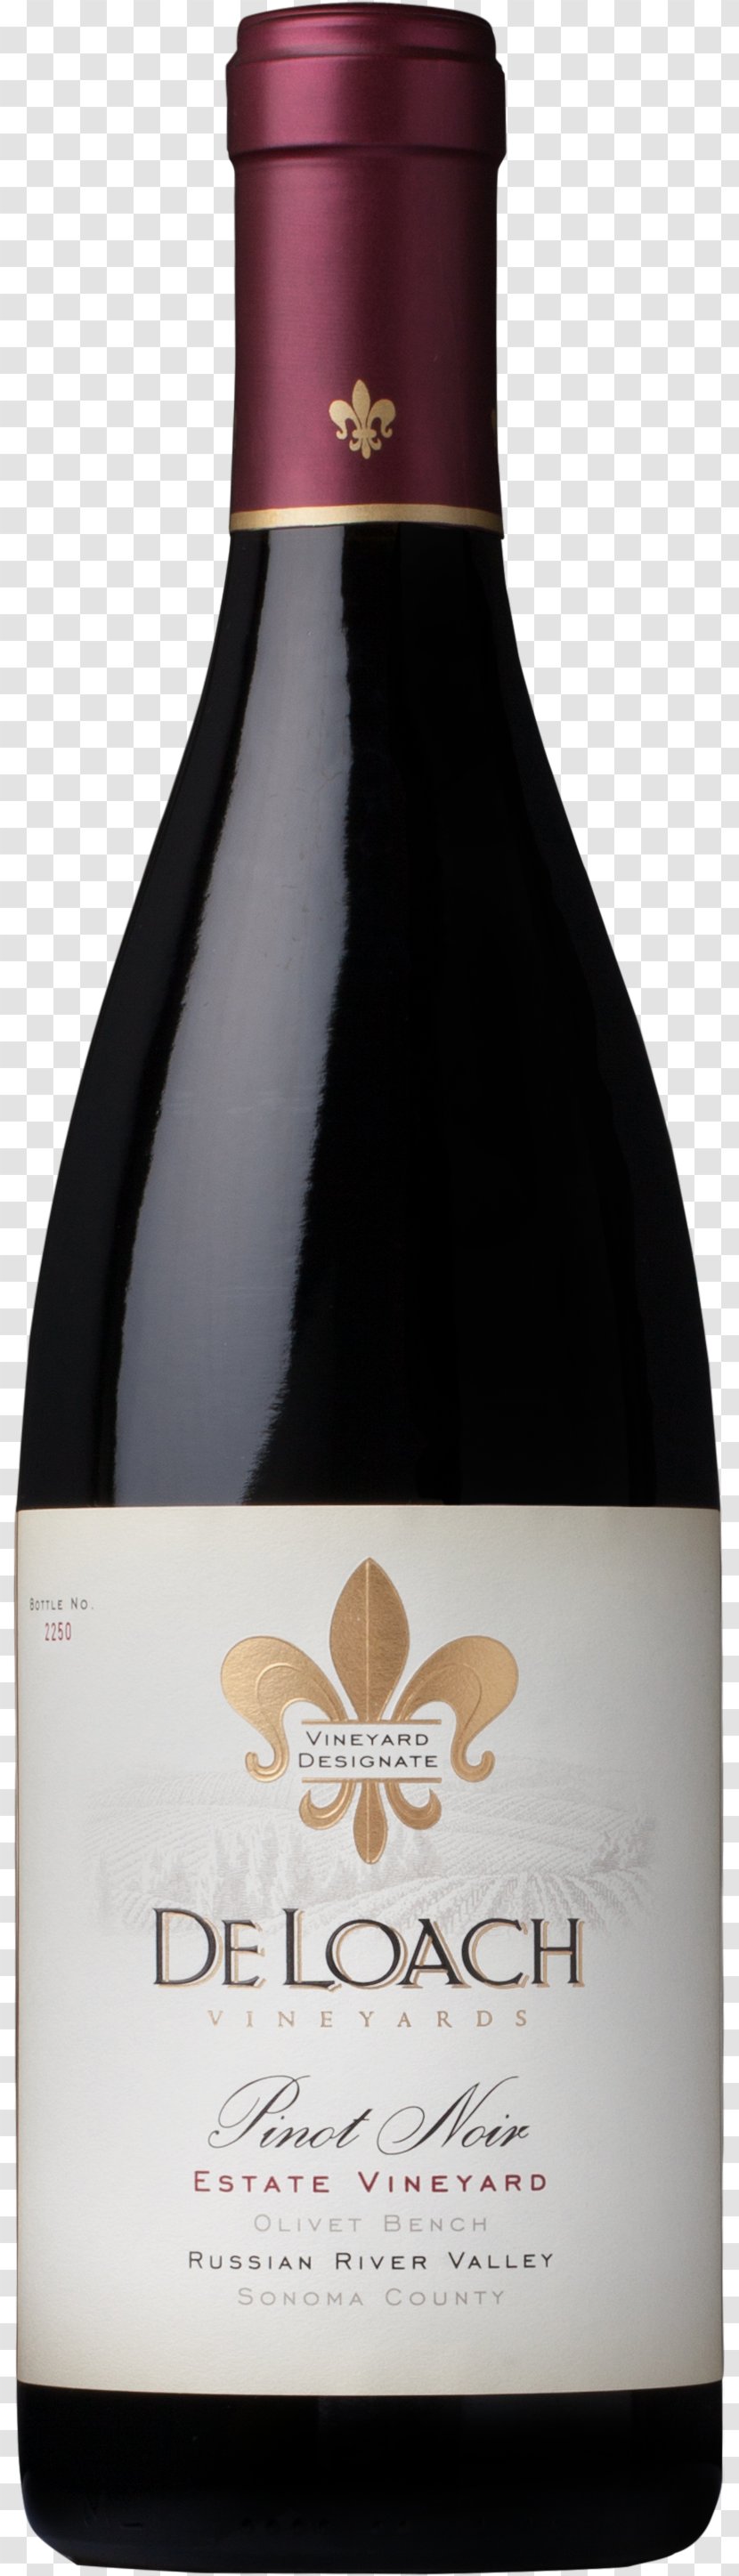 Pinot Noir DeLoach Vineyards Russian River Valley AVA Buena Vista Winery - Remove Wine Lables Transparent PNG